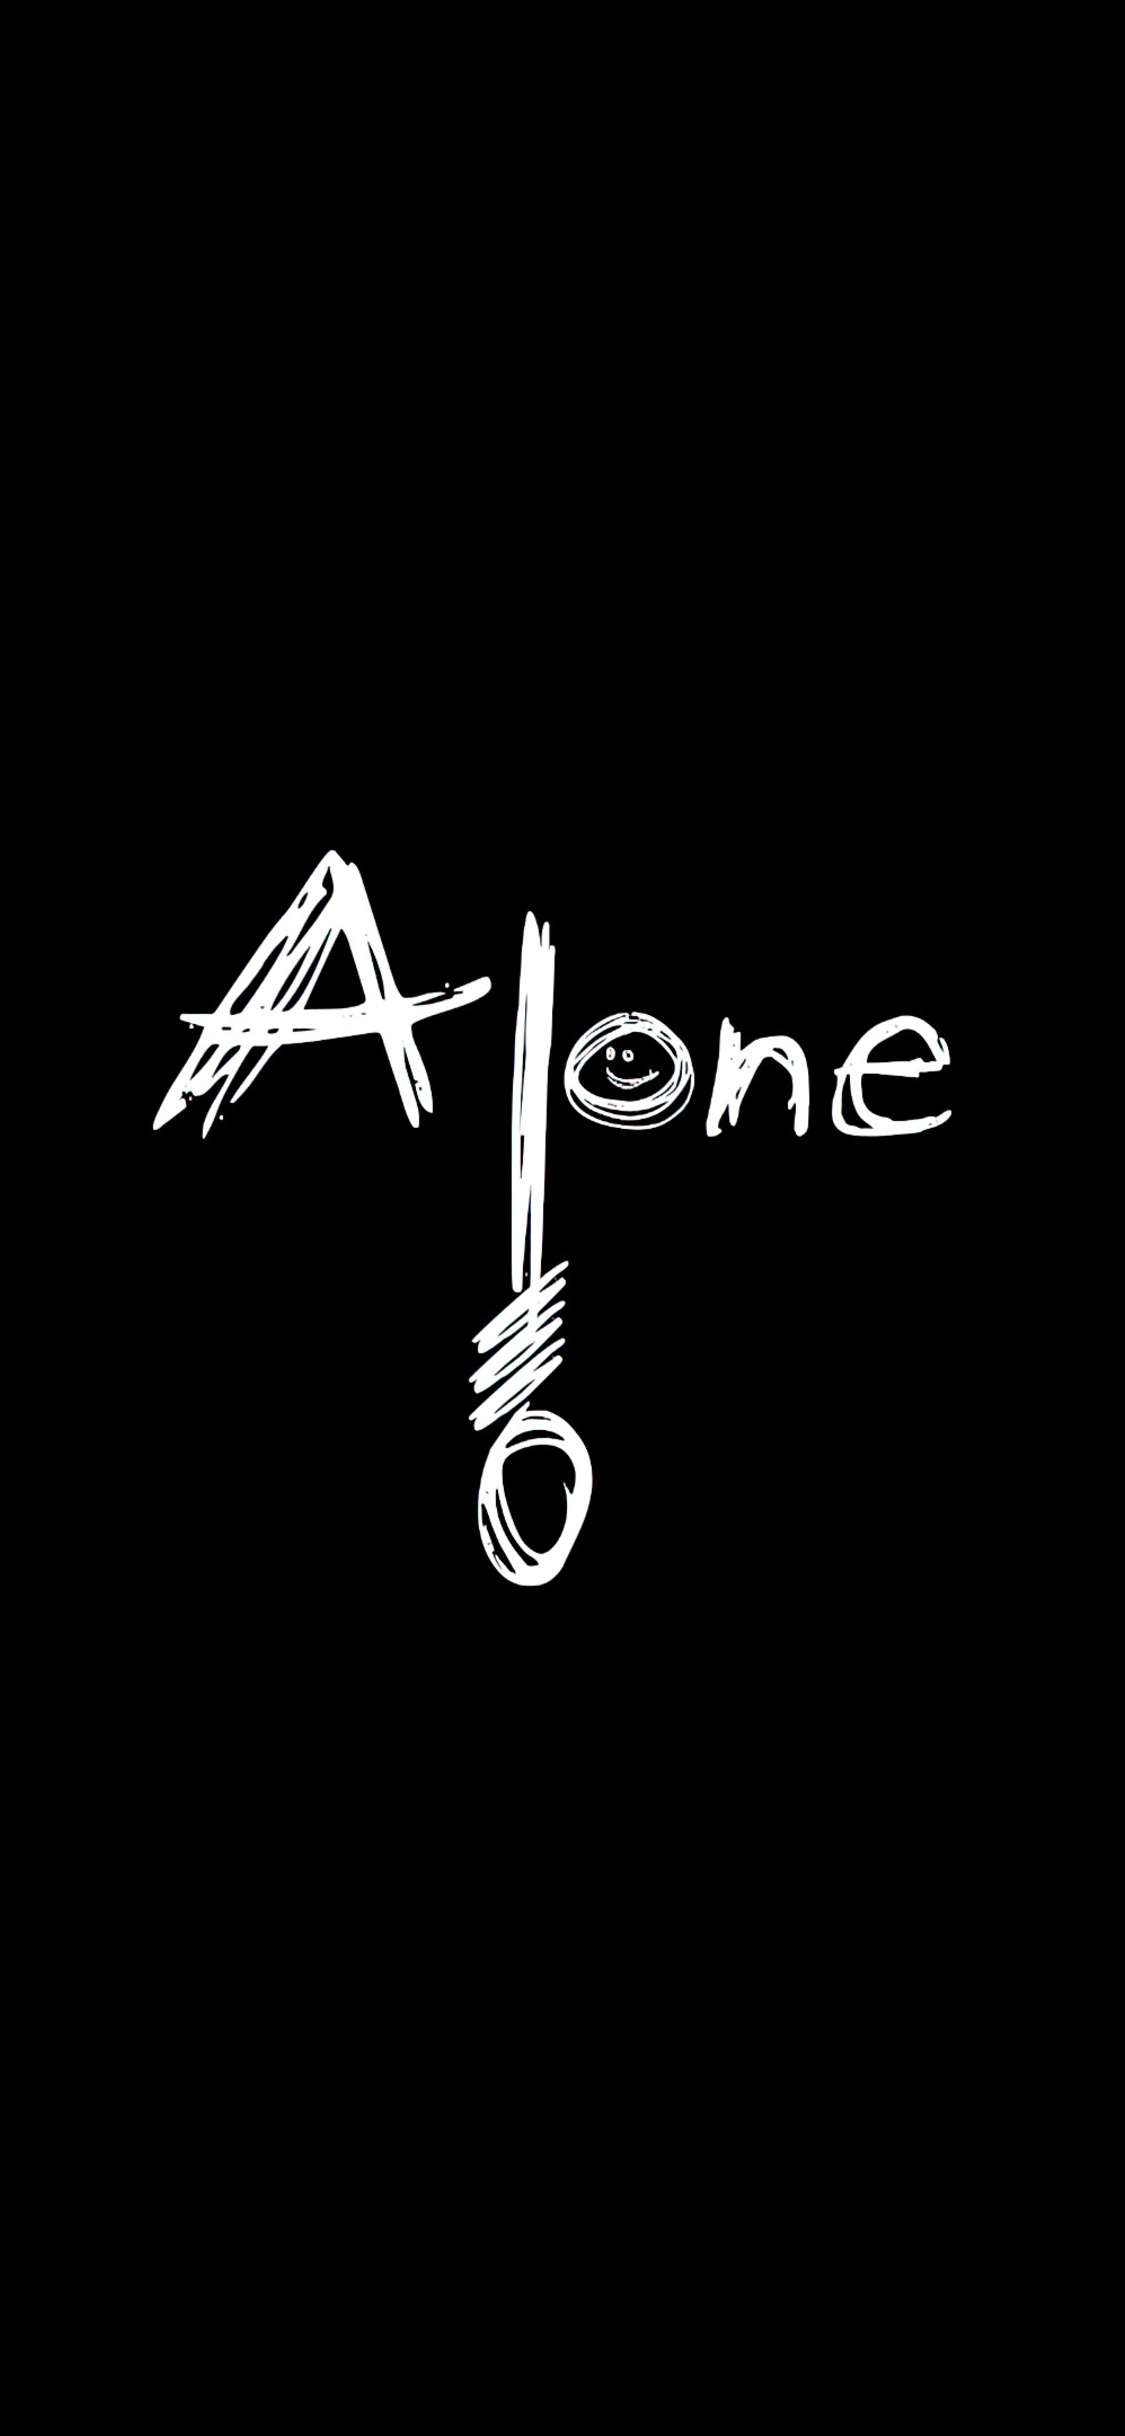 X alone dark typography k iphone xsiphone iphone x hd k wallpapers images backgrounds photos and pictures